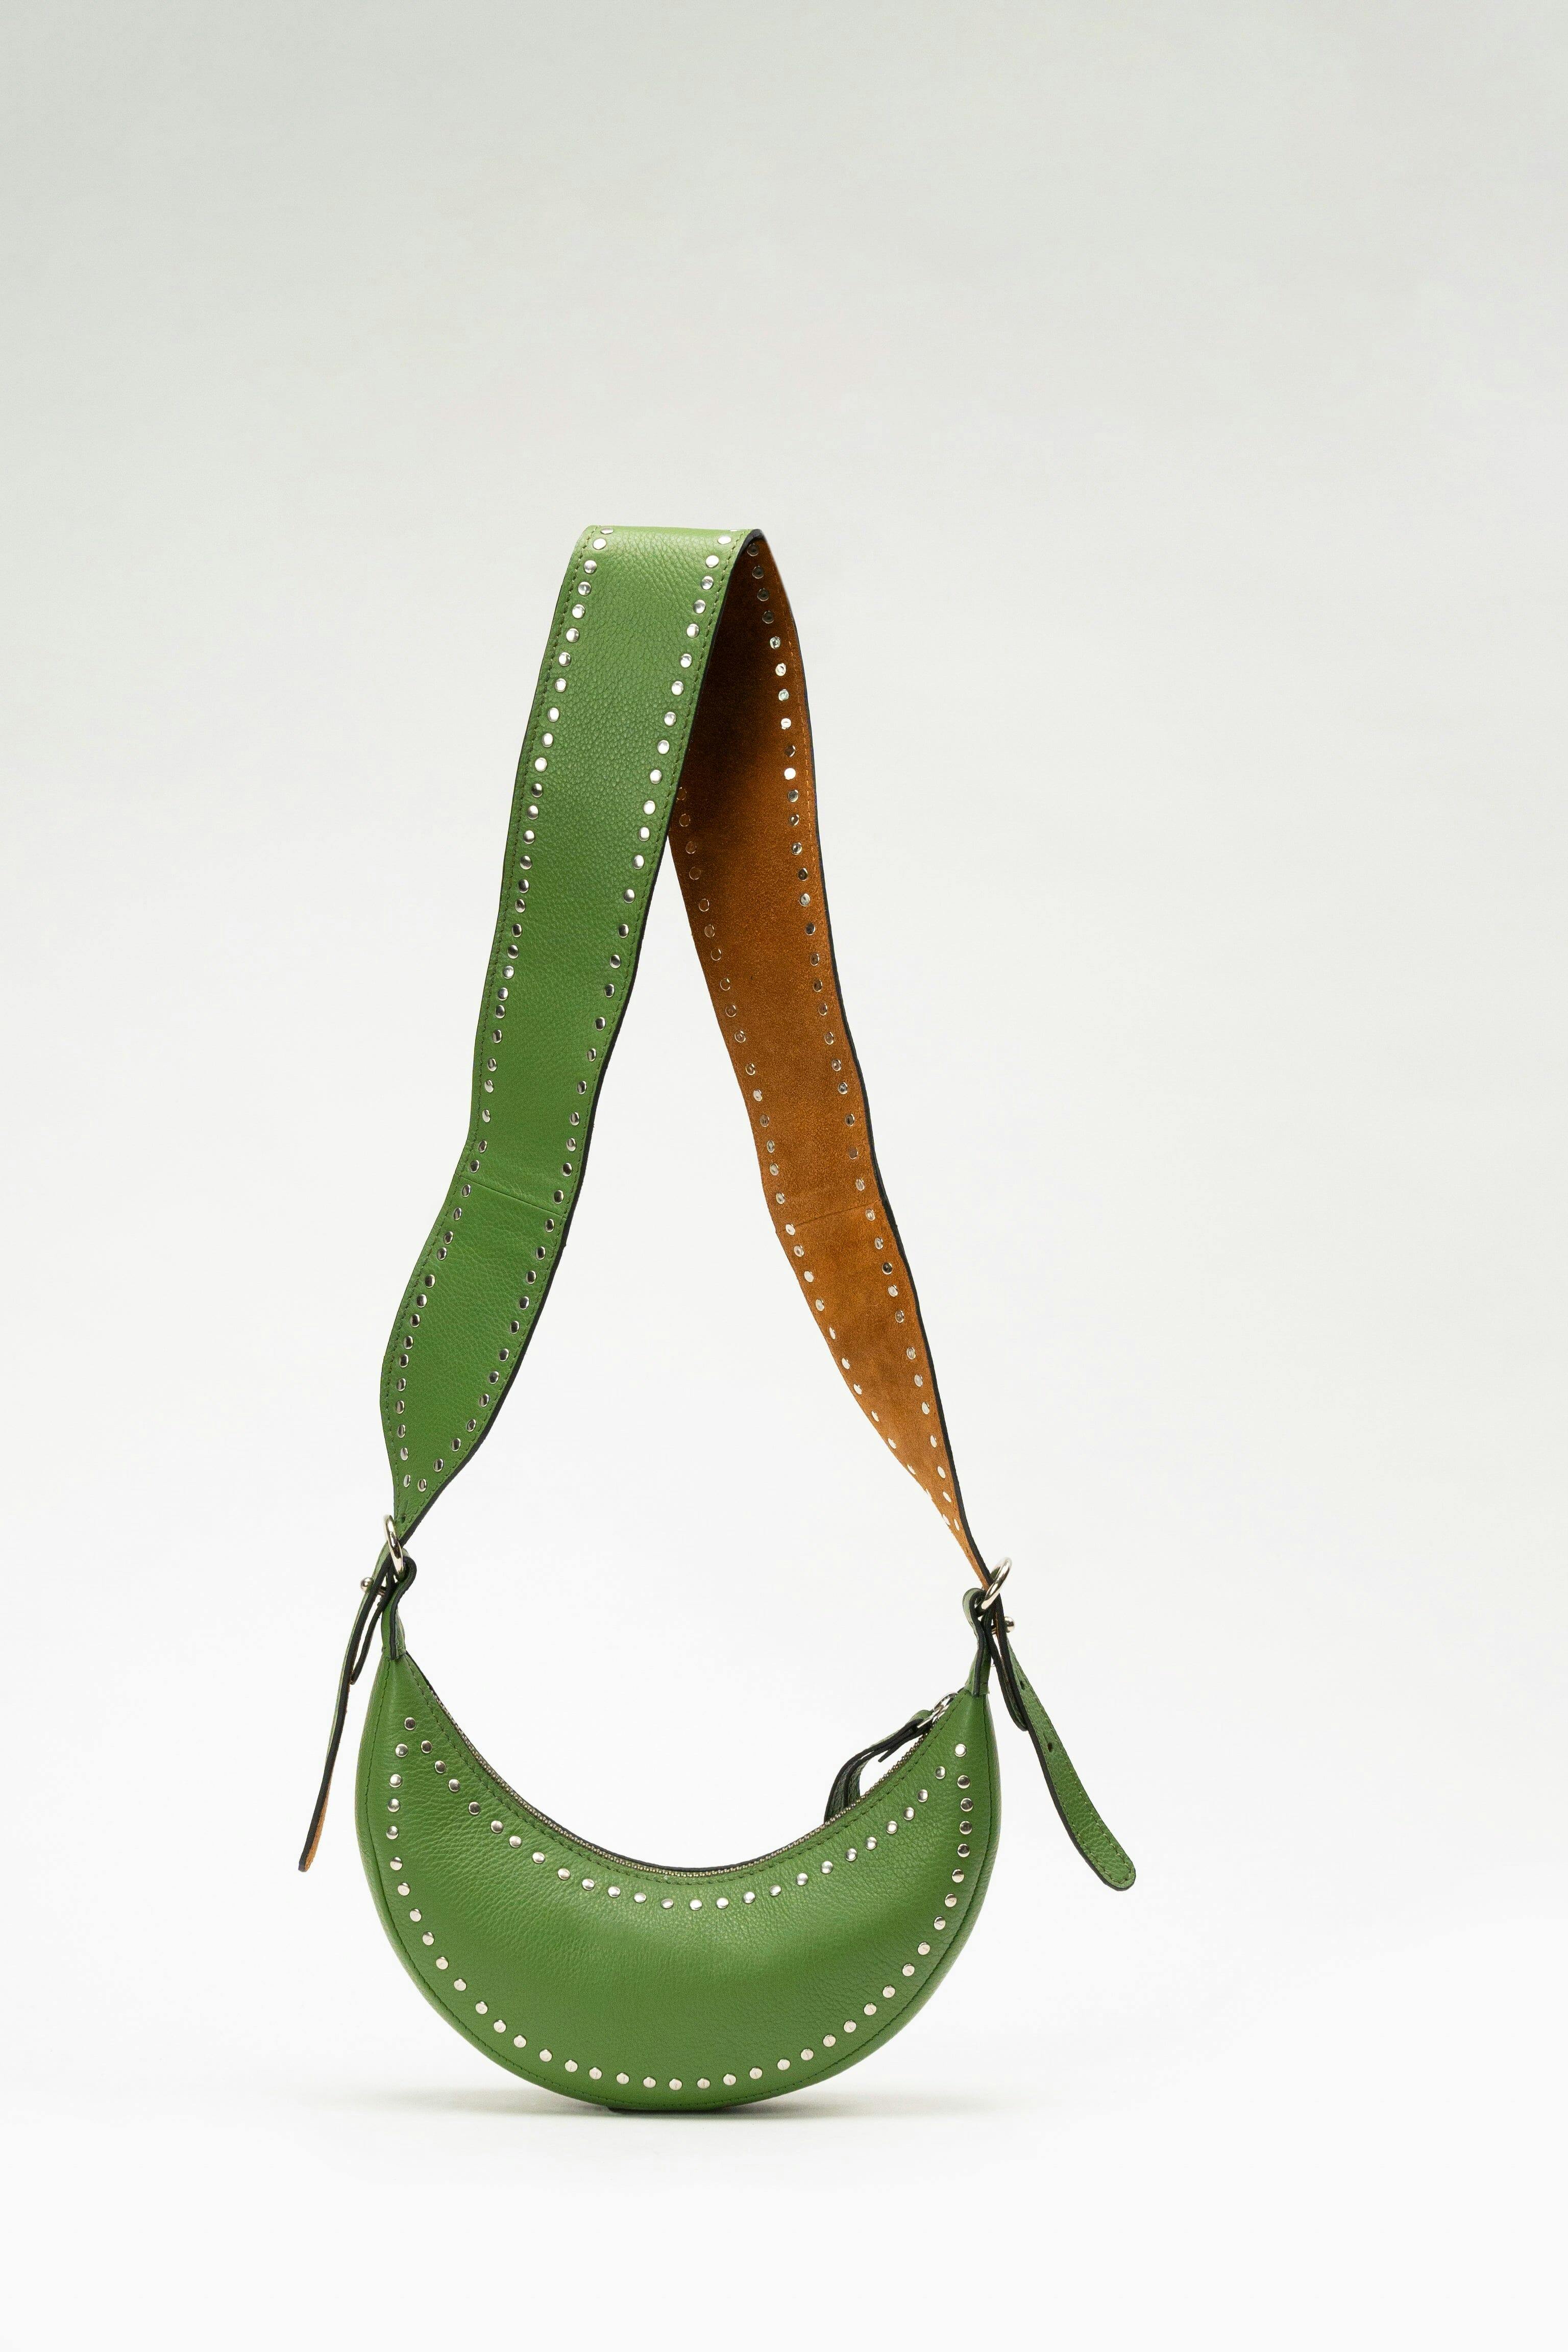 Selena Studded Body & Strap in Jade, a product by Mistry 